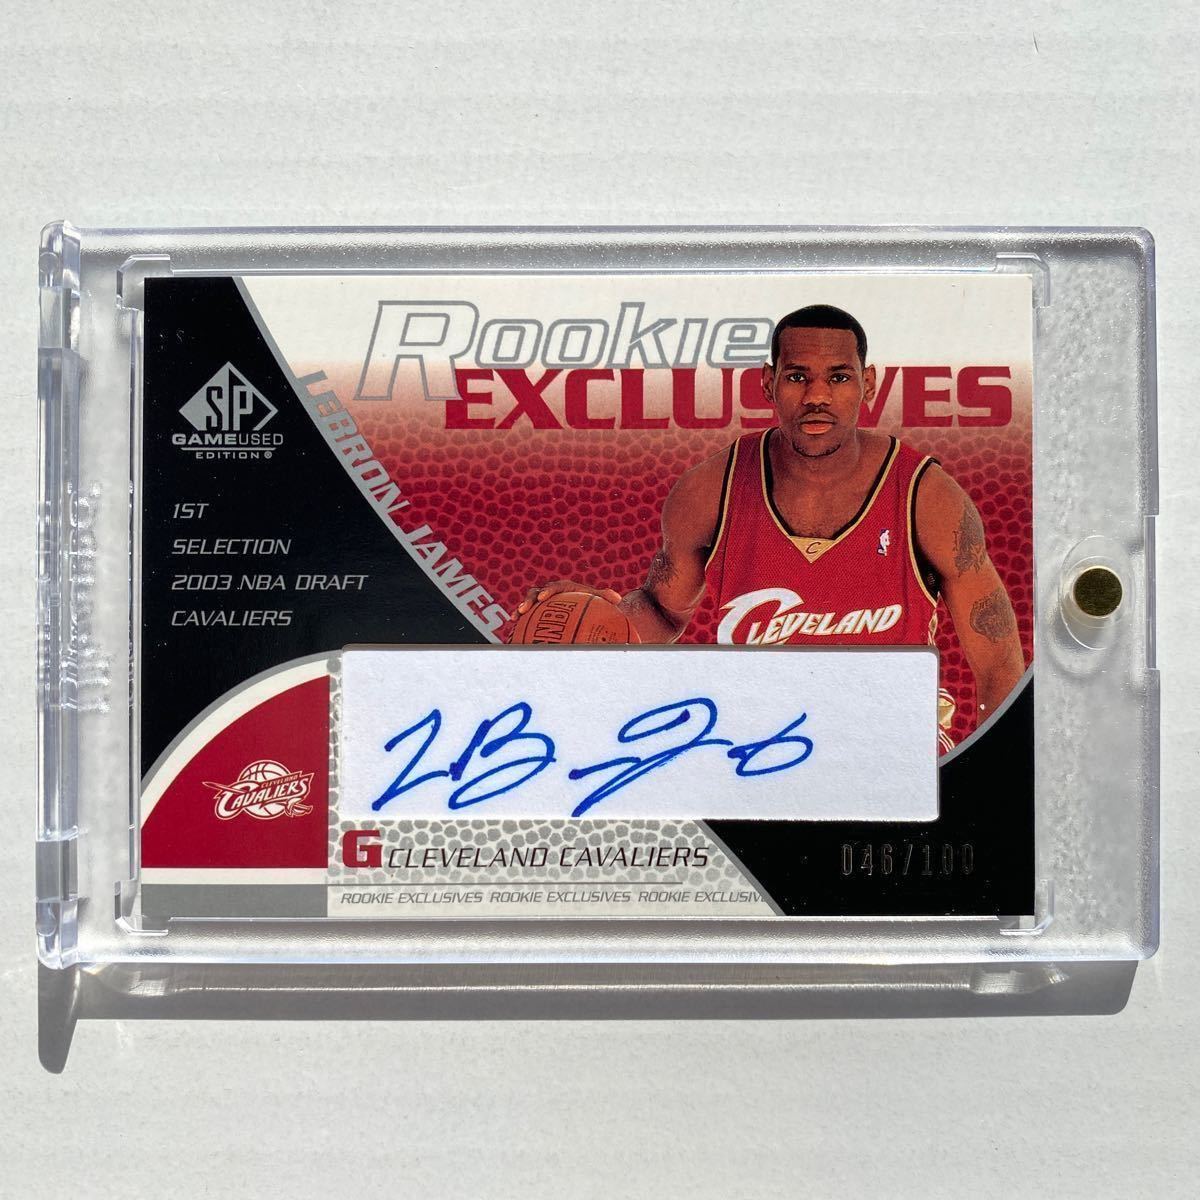 ◆ 2003-04 UD SP GAMEUSED ROOKIE EXCLUSIVES LEBRON JAMES 【レブロンジェームス】RC AUTO 046/100 （FULLNAME AUTO） ◆_画像1